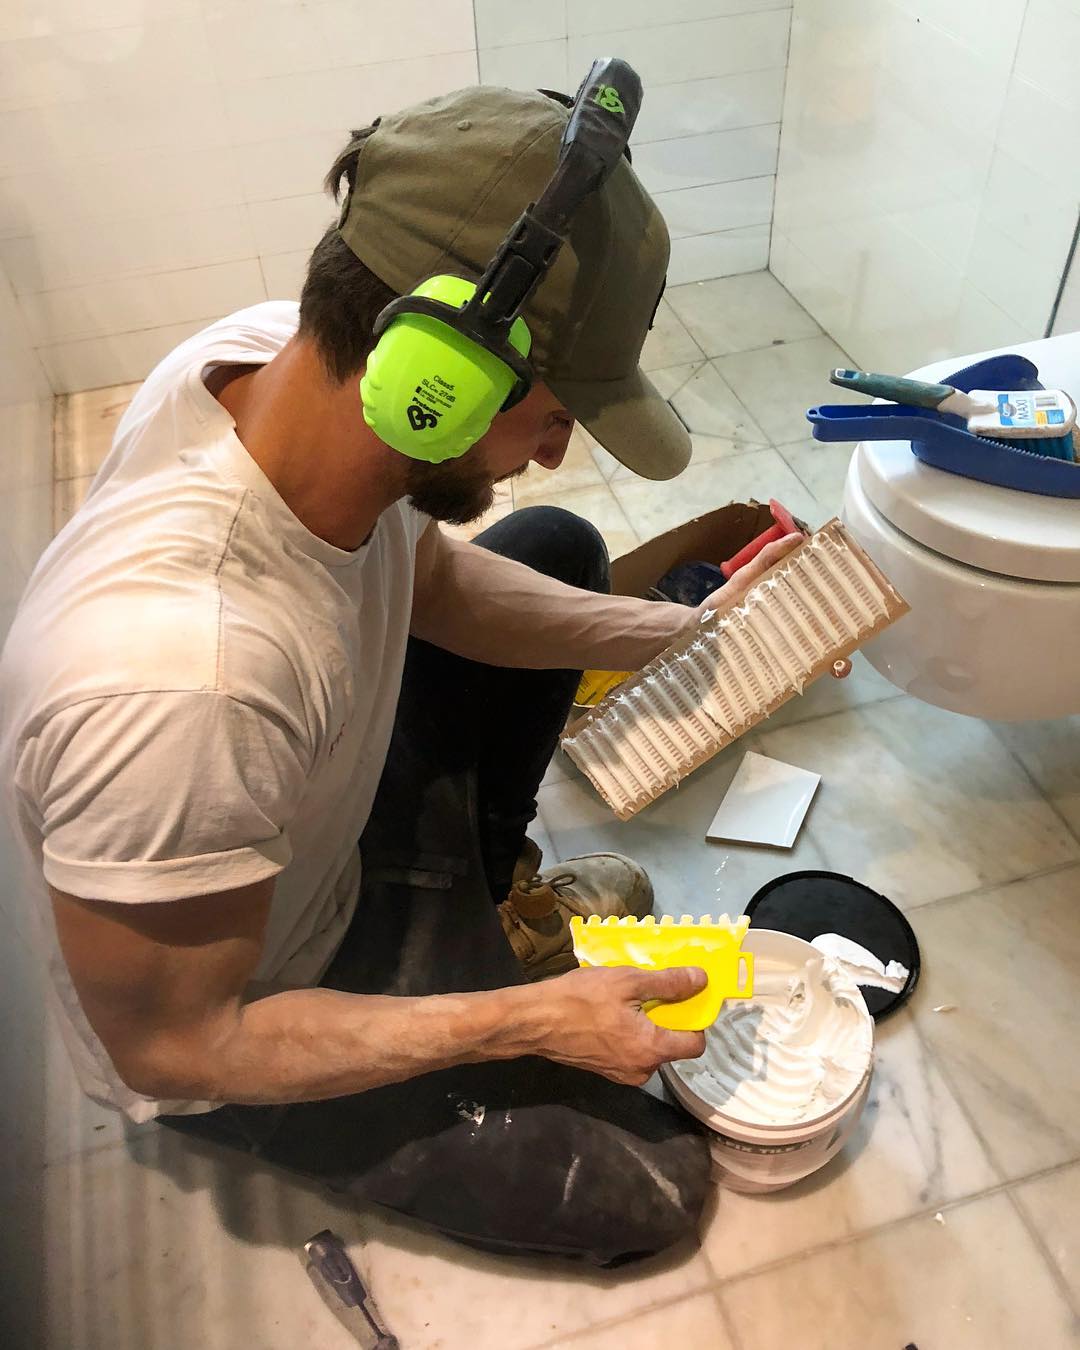 A worker of Pro Projects adding glue to tiles in a bathroom in the innerwest